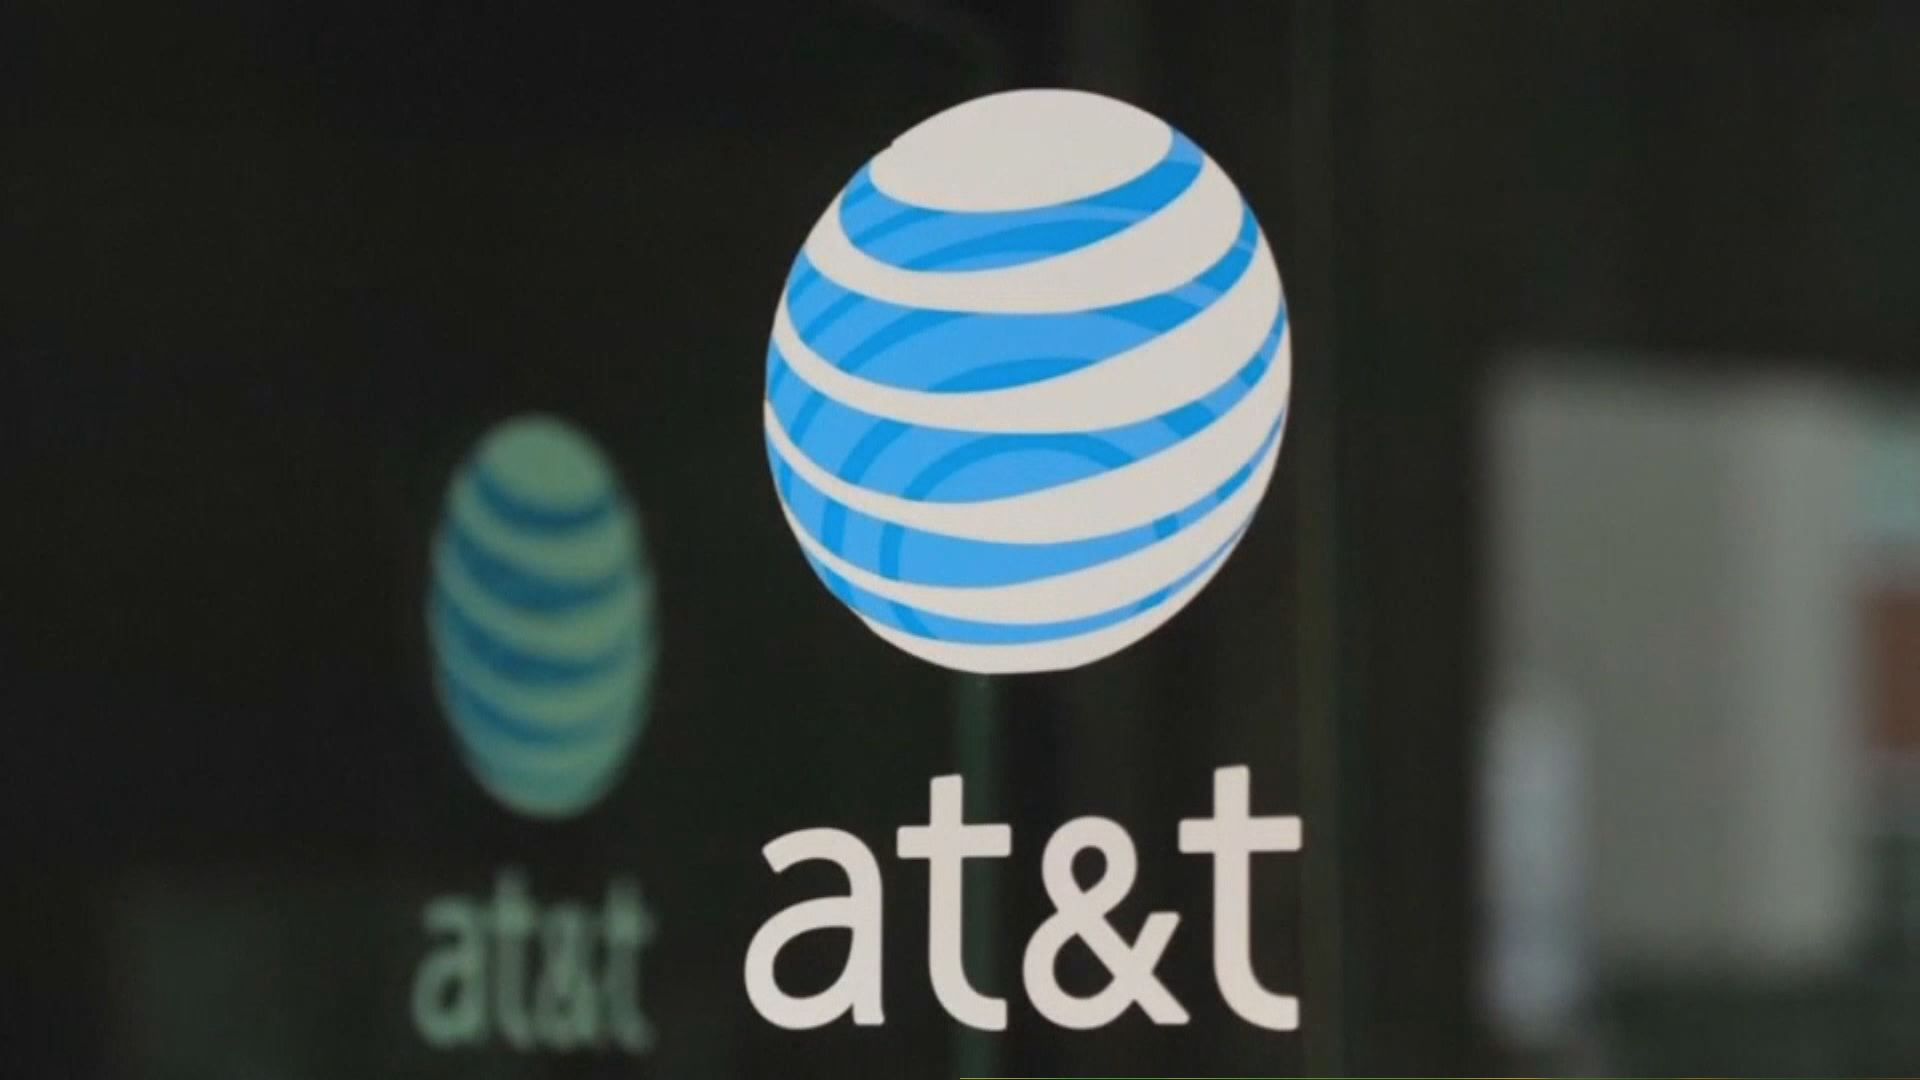 AT&T data breach includes calls made to Canada